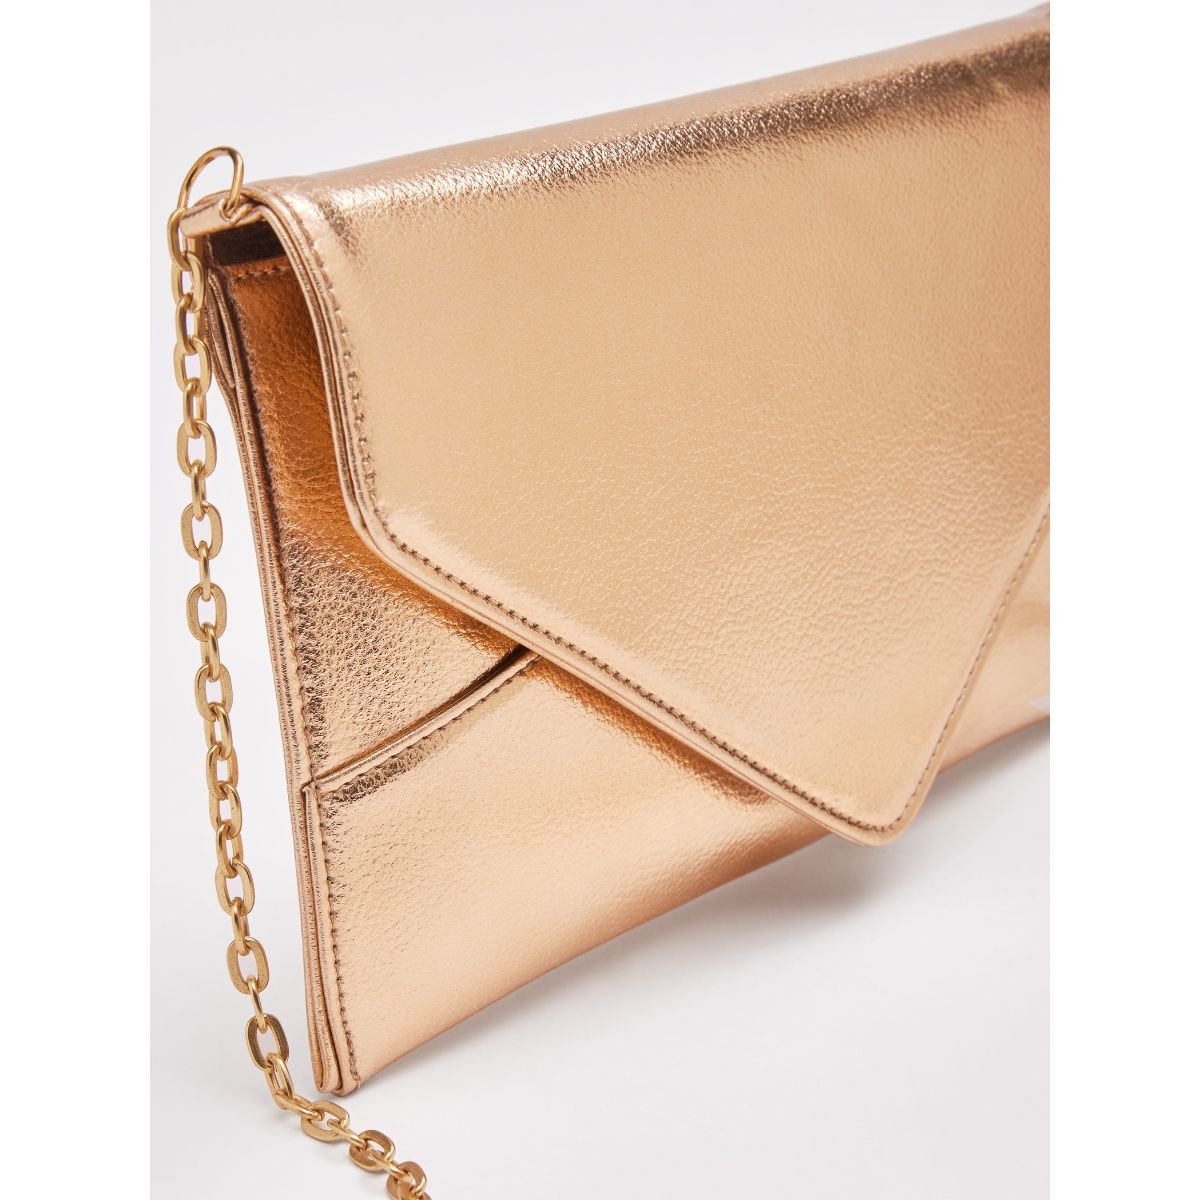 12 Under $30 Clutches on Amazon That Are Perfect for New Year's Eve